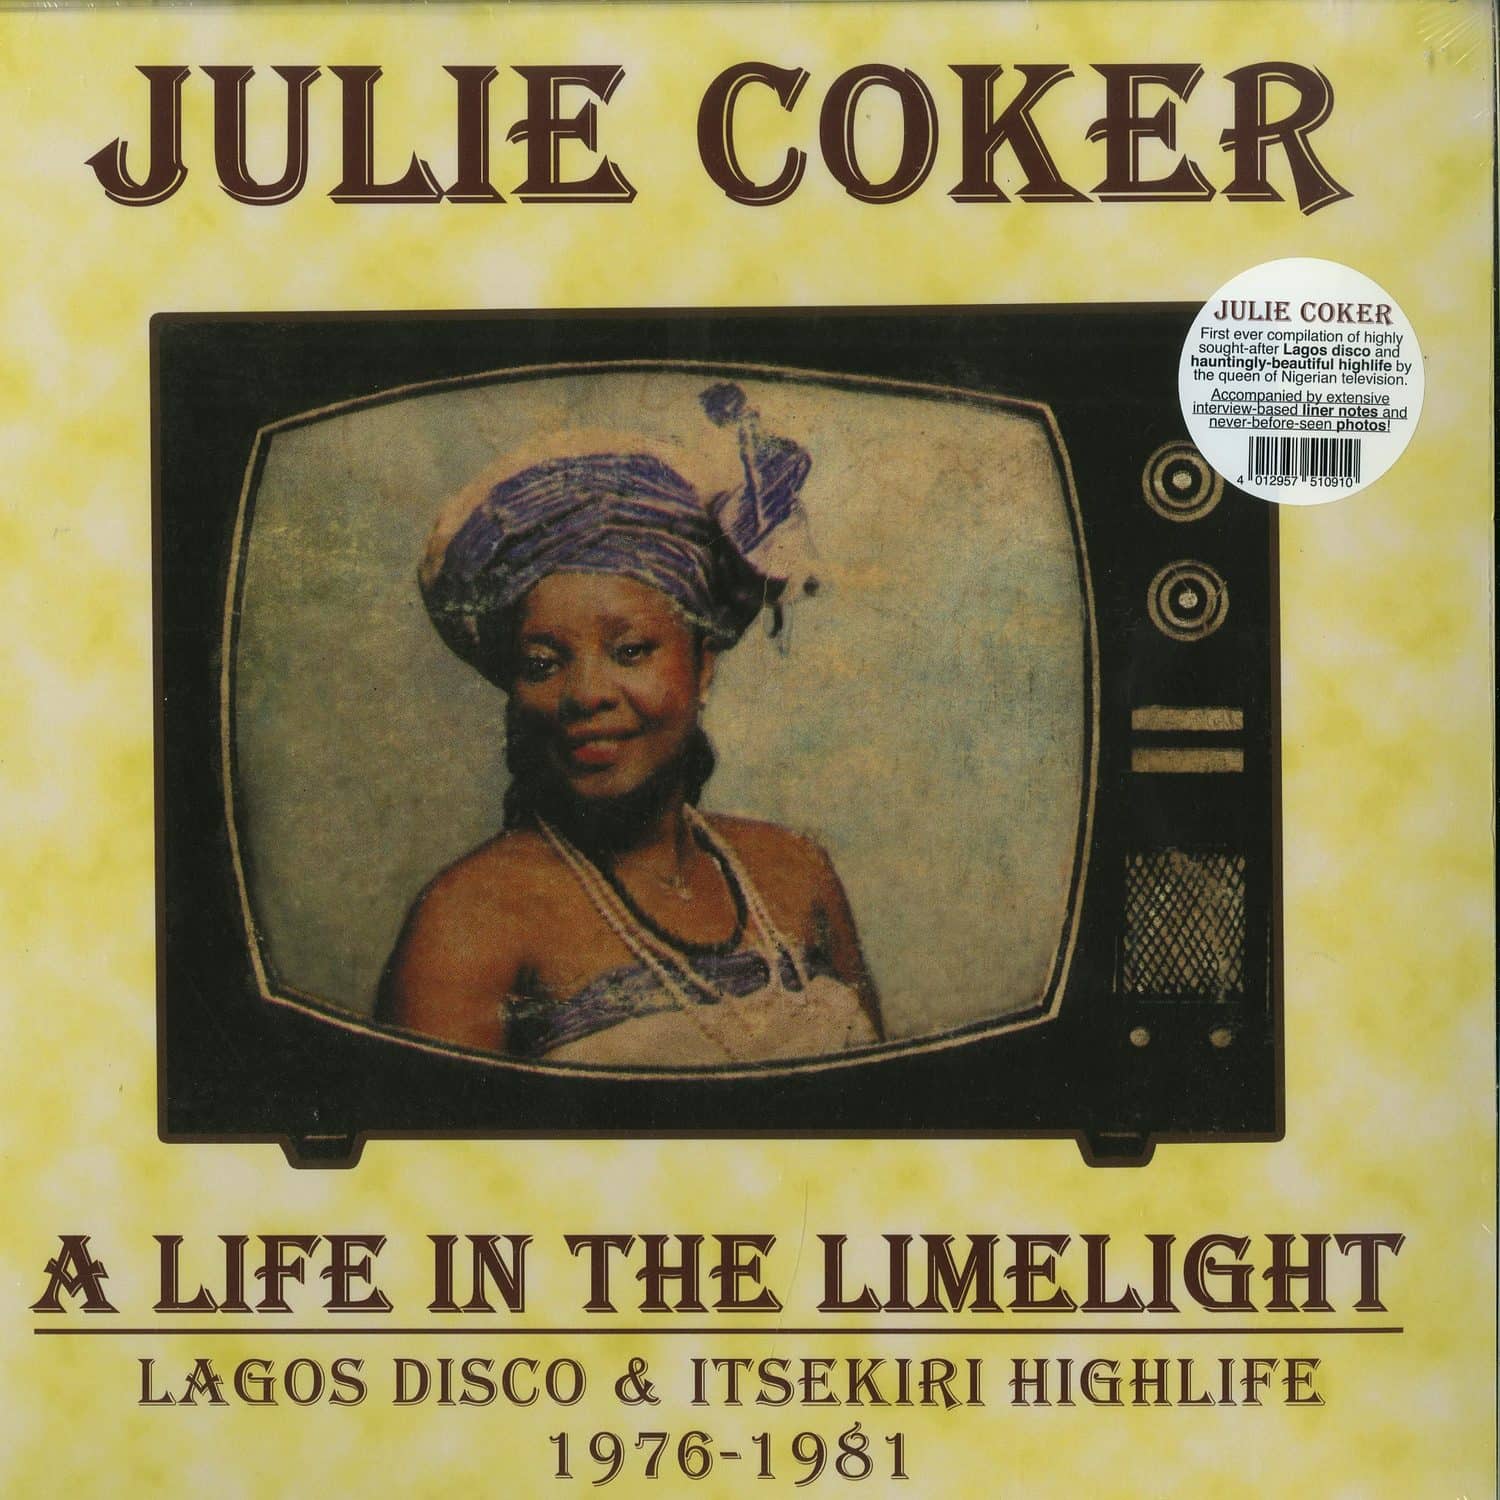 Julie Coker - A LIFE IN THE LIMELIGHT 